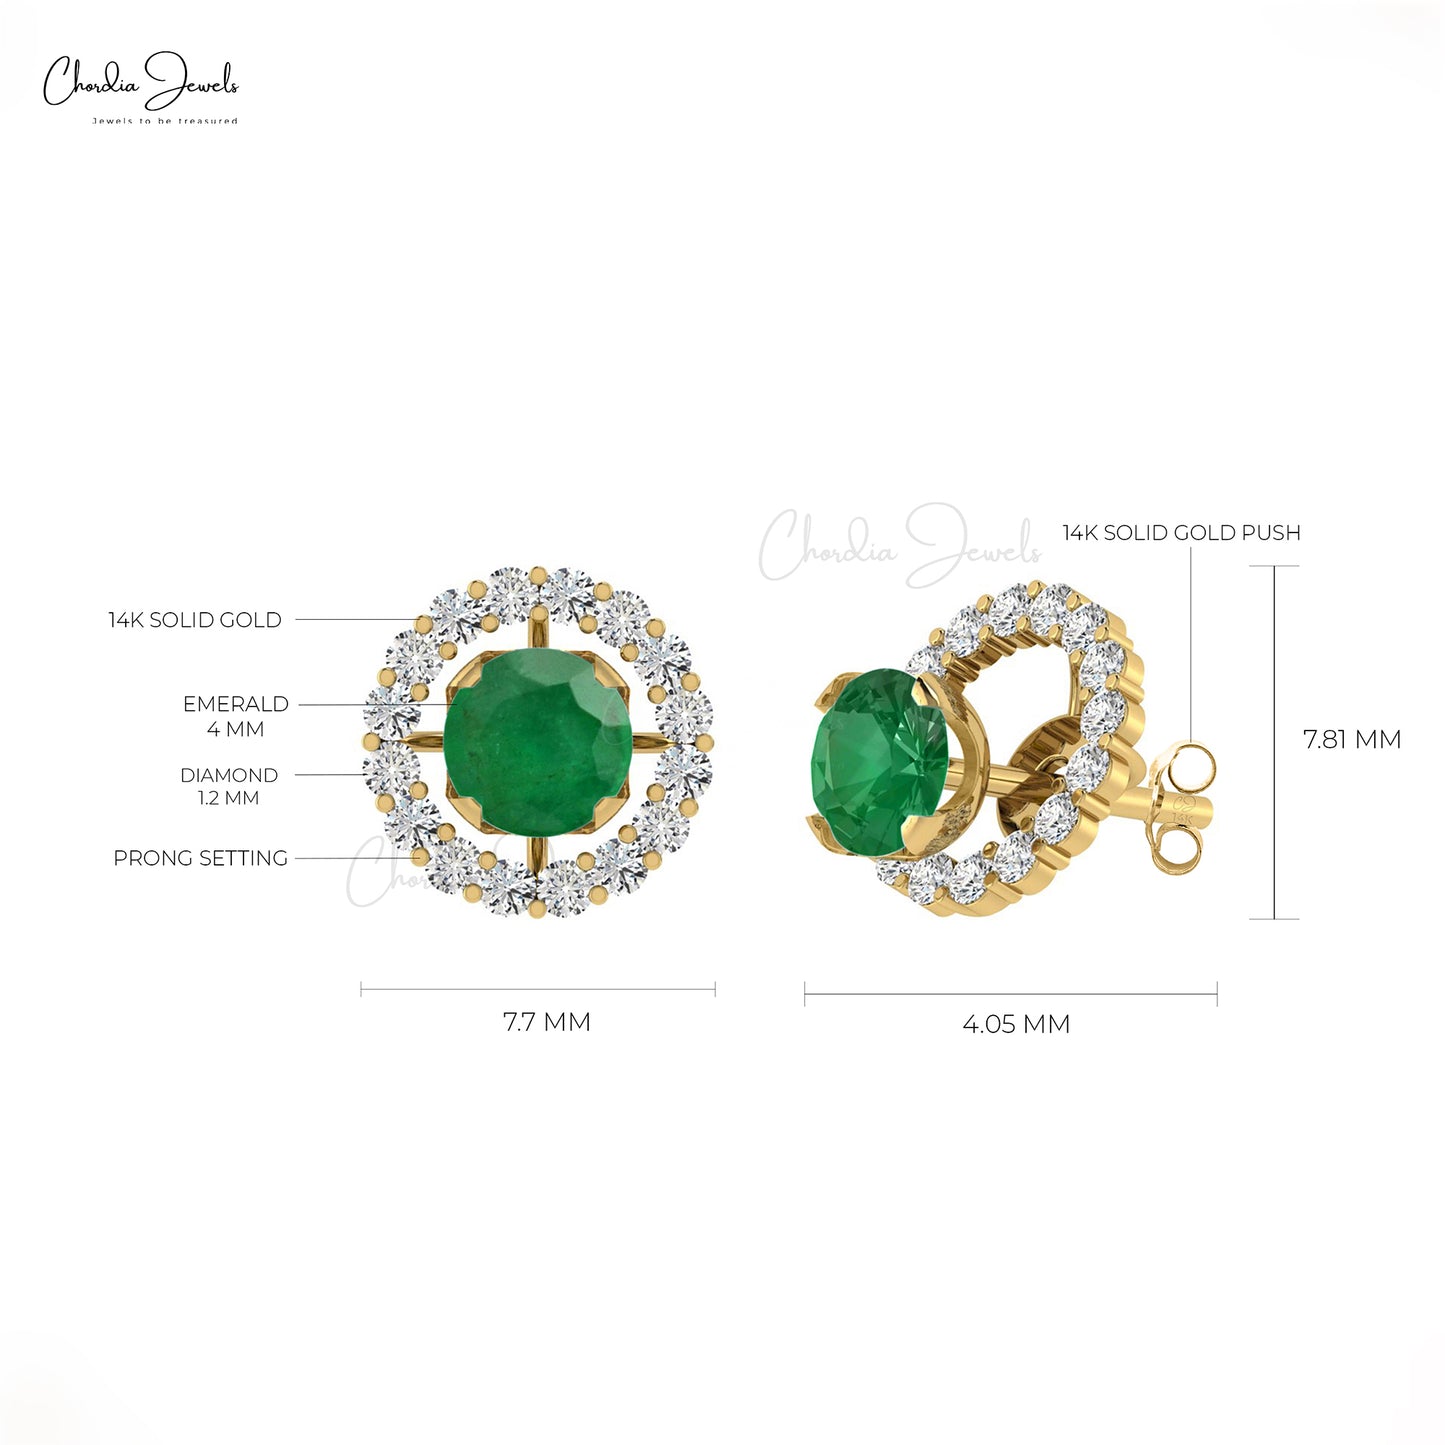 Elevate your elegance with these emerald stud earrings.